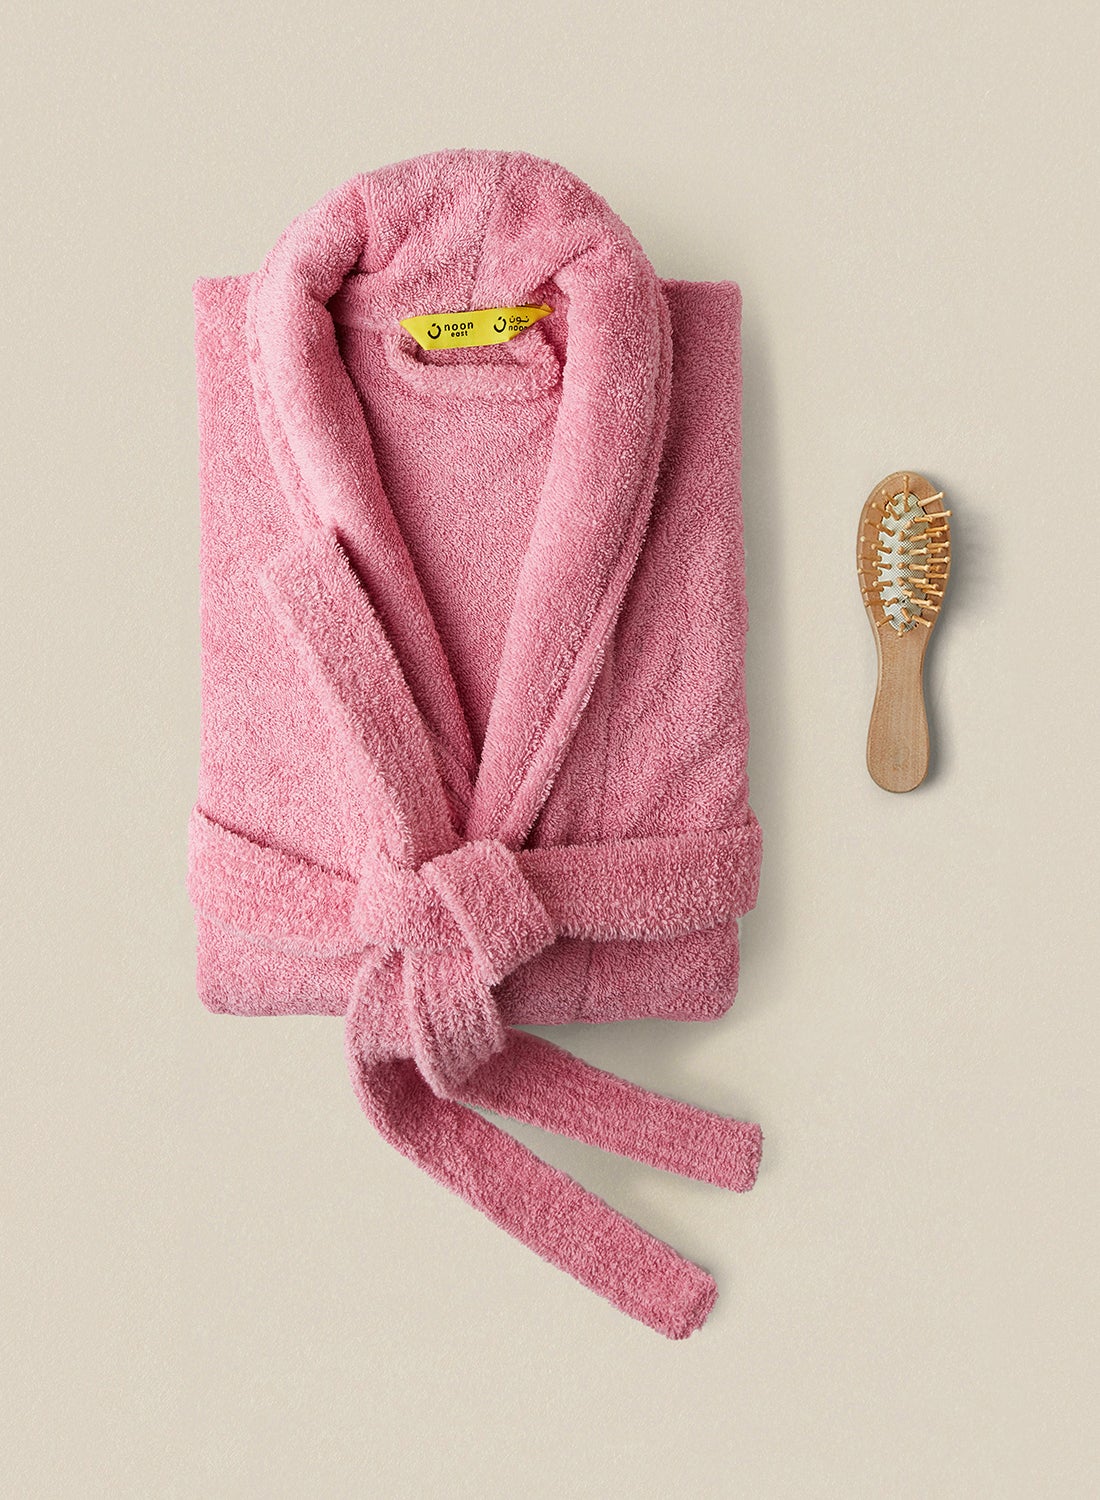 Bathrobe - 400 GSM 100% Cotton Terry Silky Soft Spa Quality Comfort - Shawl Collar & Pocket - Pink Color - 1 Piece 